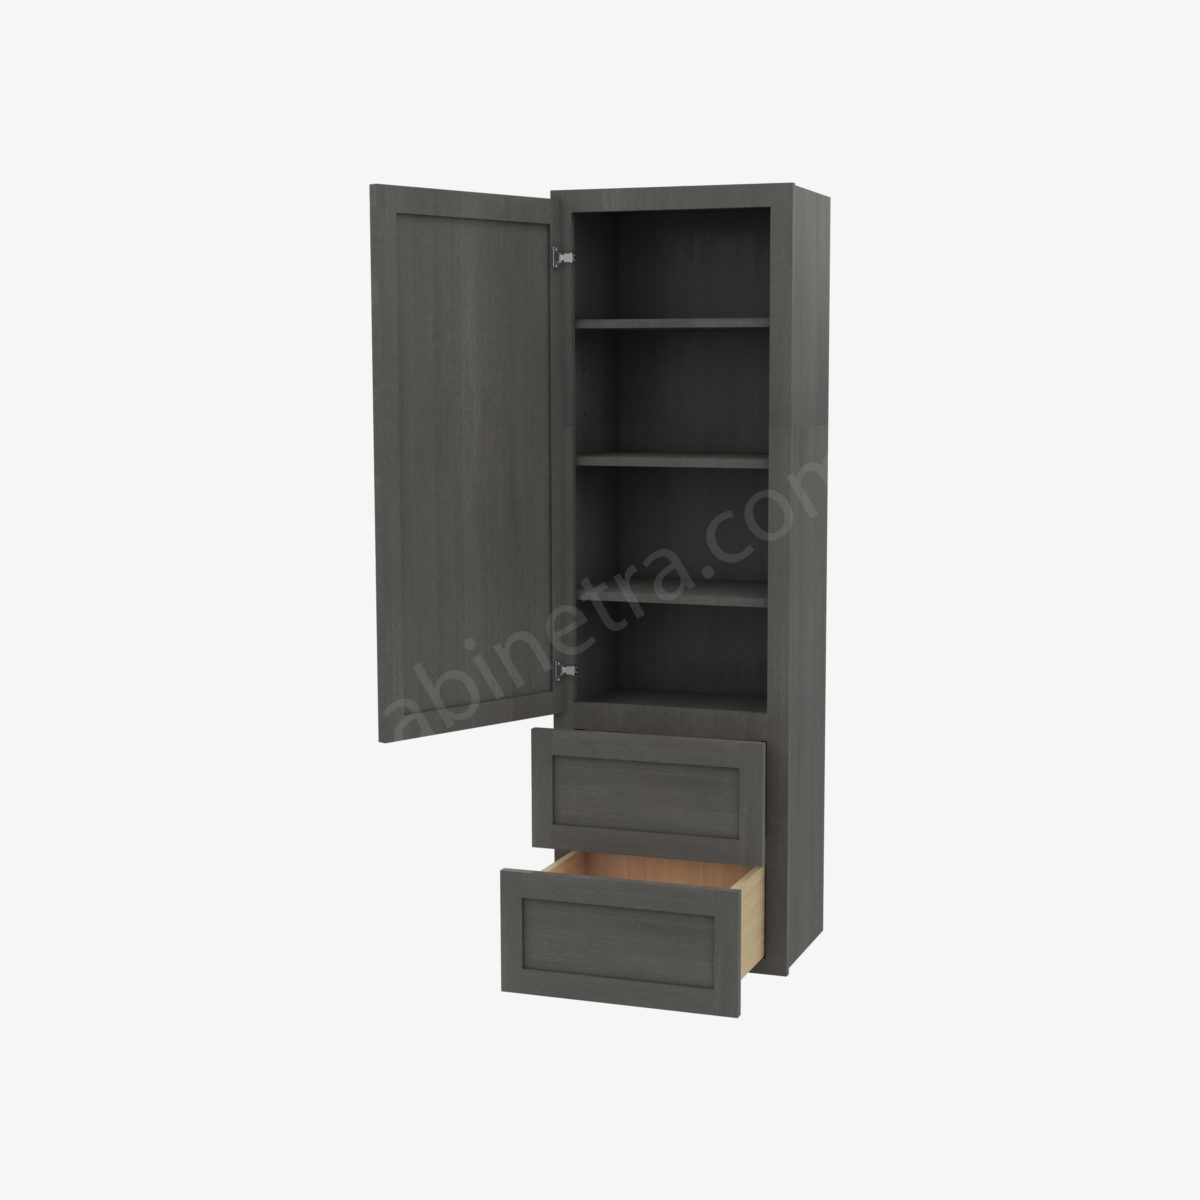 AG W2D1860 5 Forevermark Greystone Shaker Cabinetra scaled